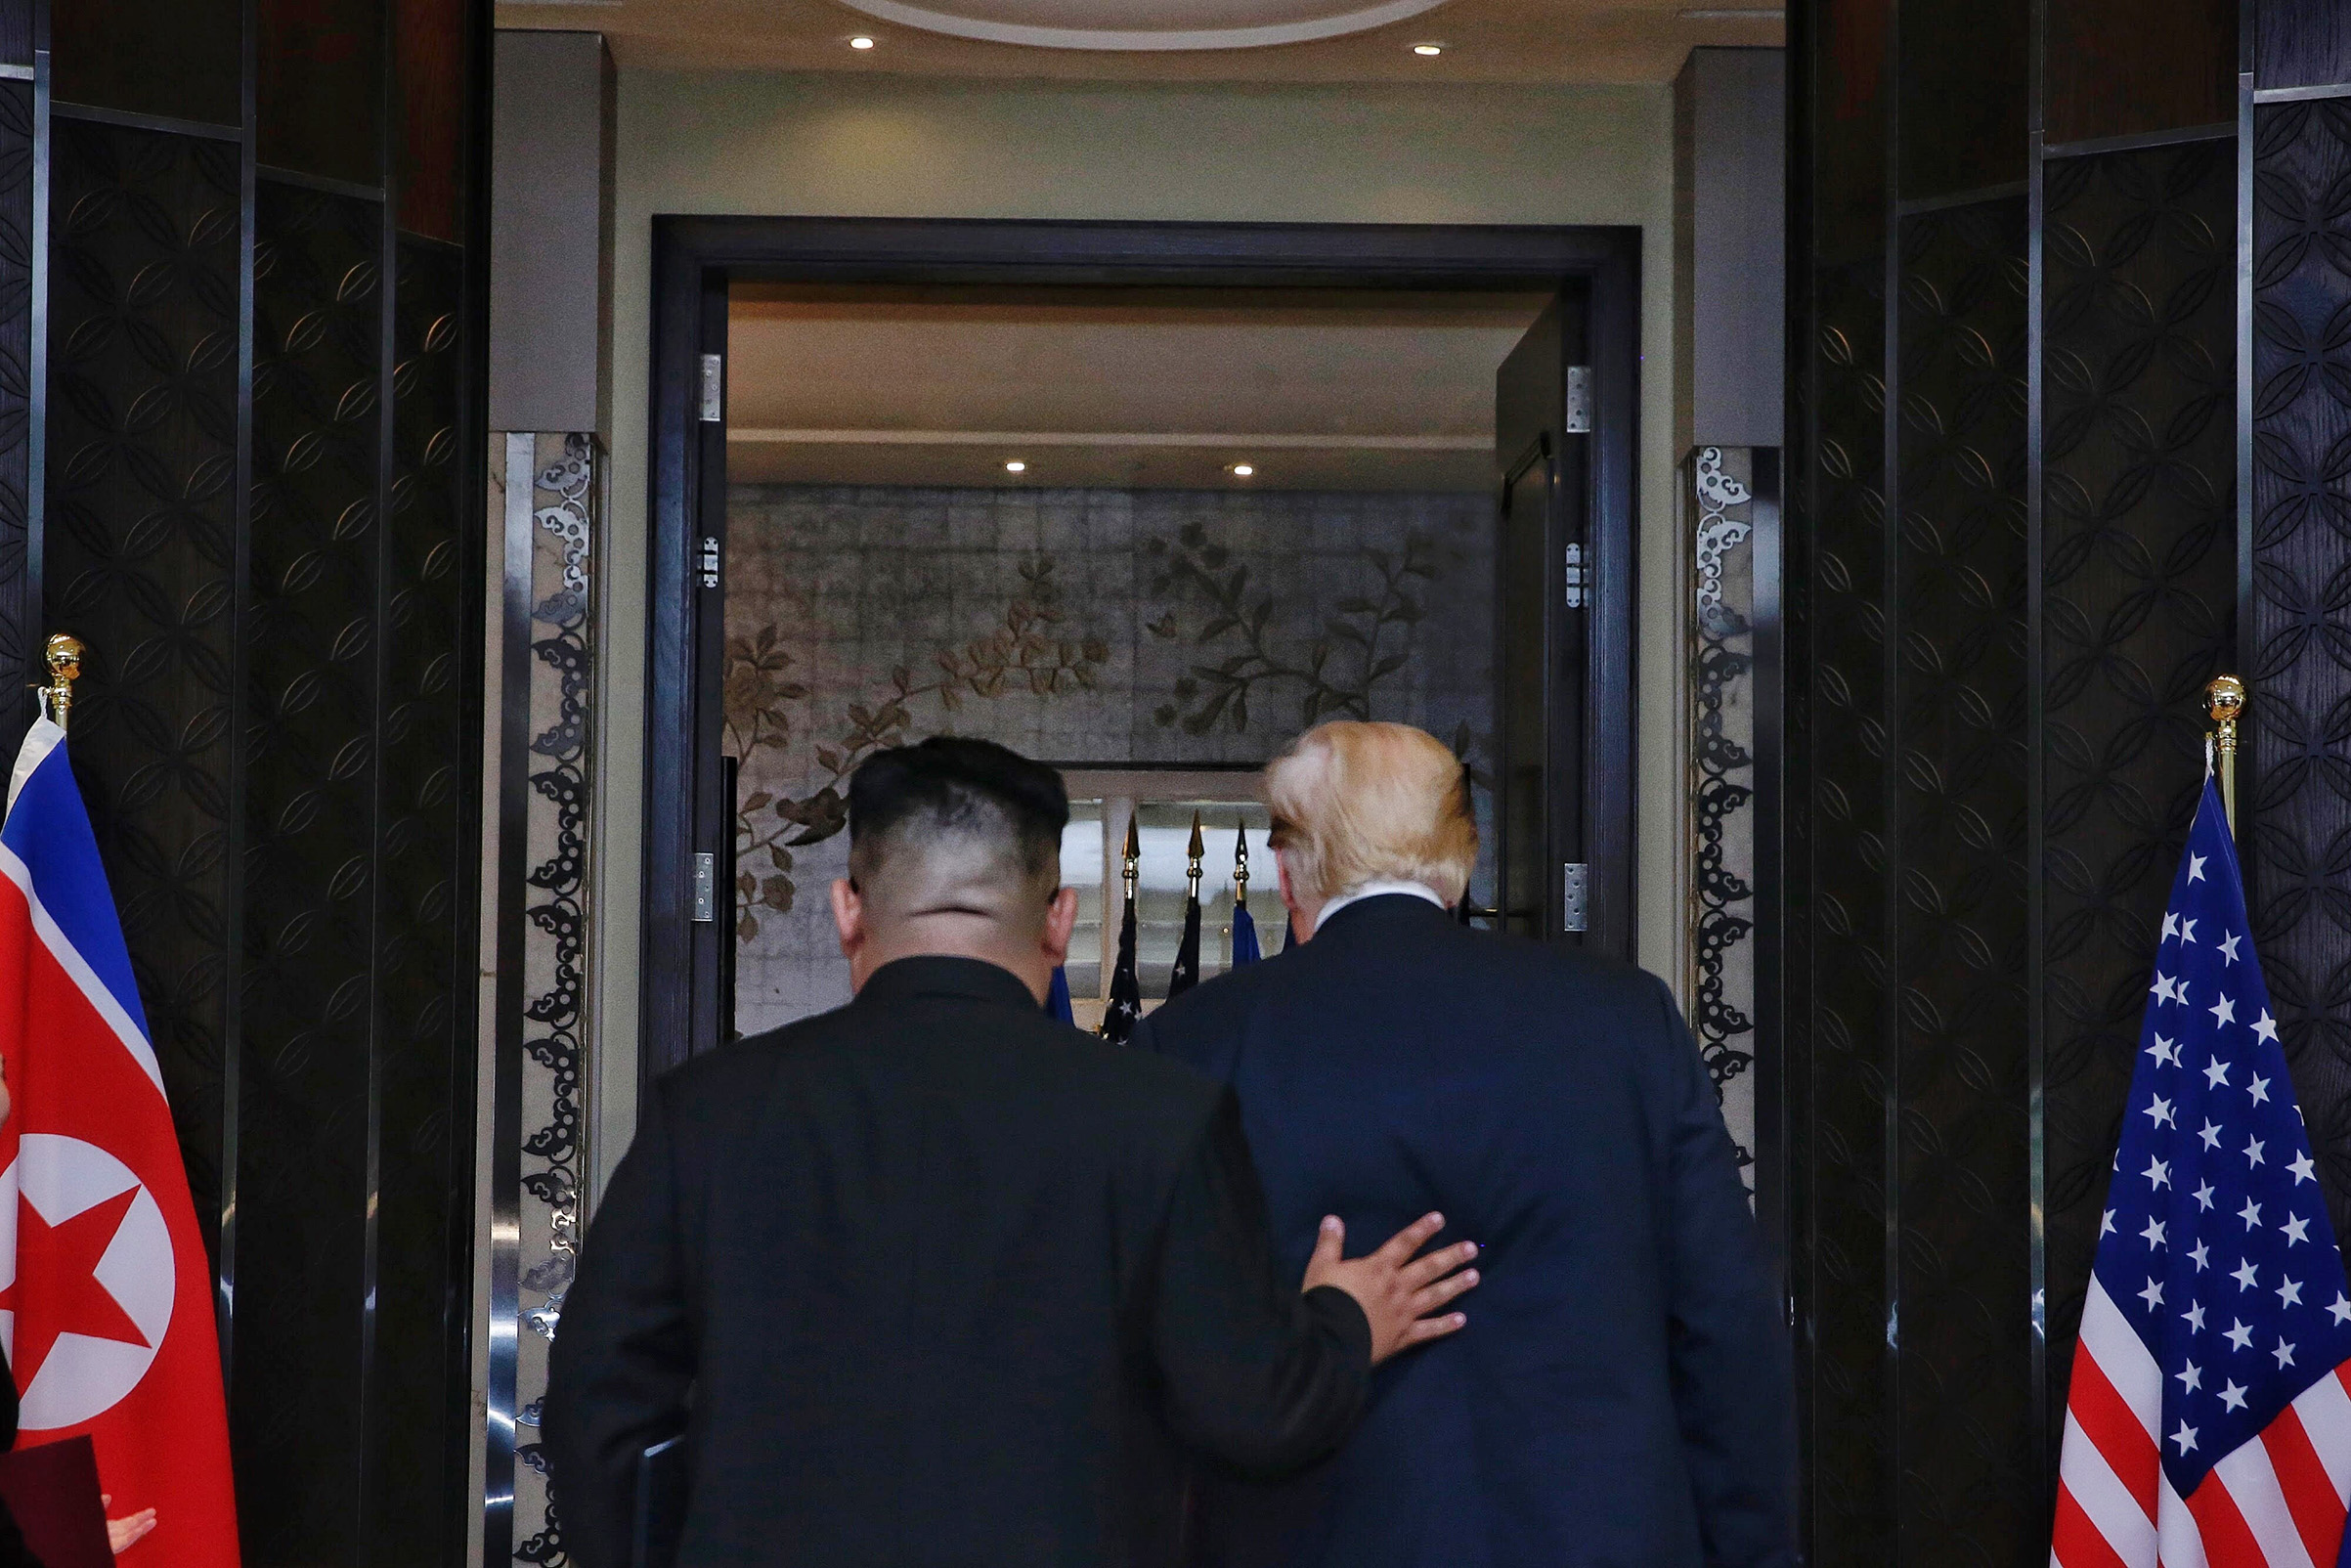 Kim and Trump depart the signing ceremony at the end of their meeting in Singapore on June 12 (Kevin Lim—The Straits Times/Anadolu Agency/Getty Images)